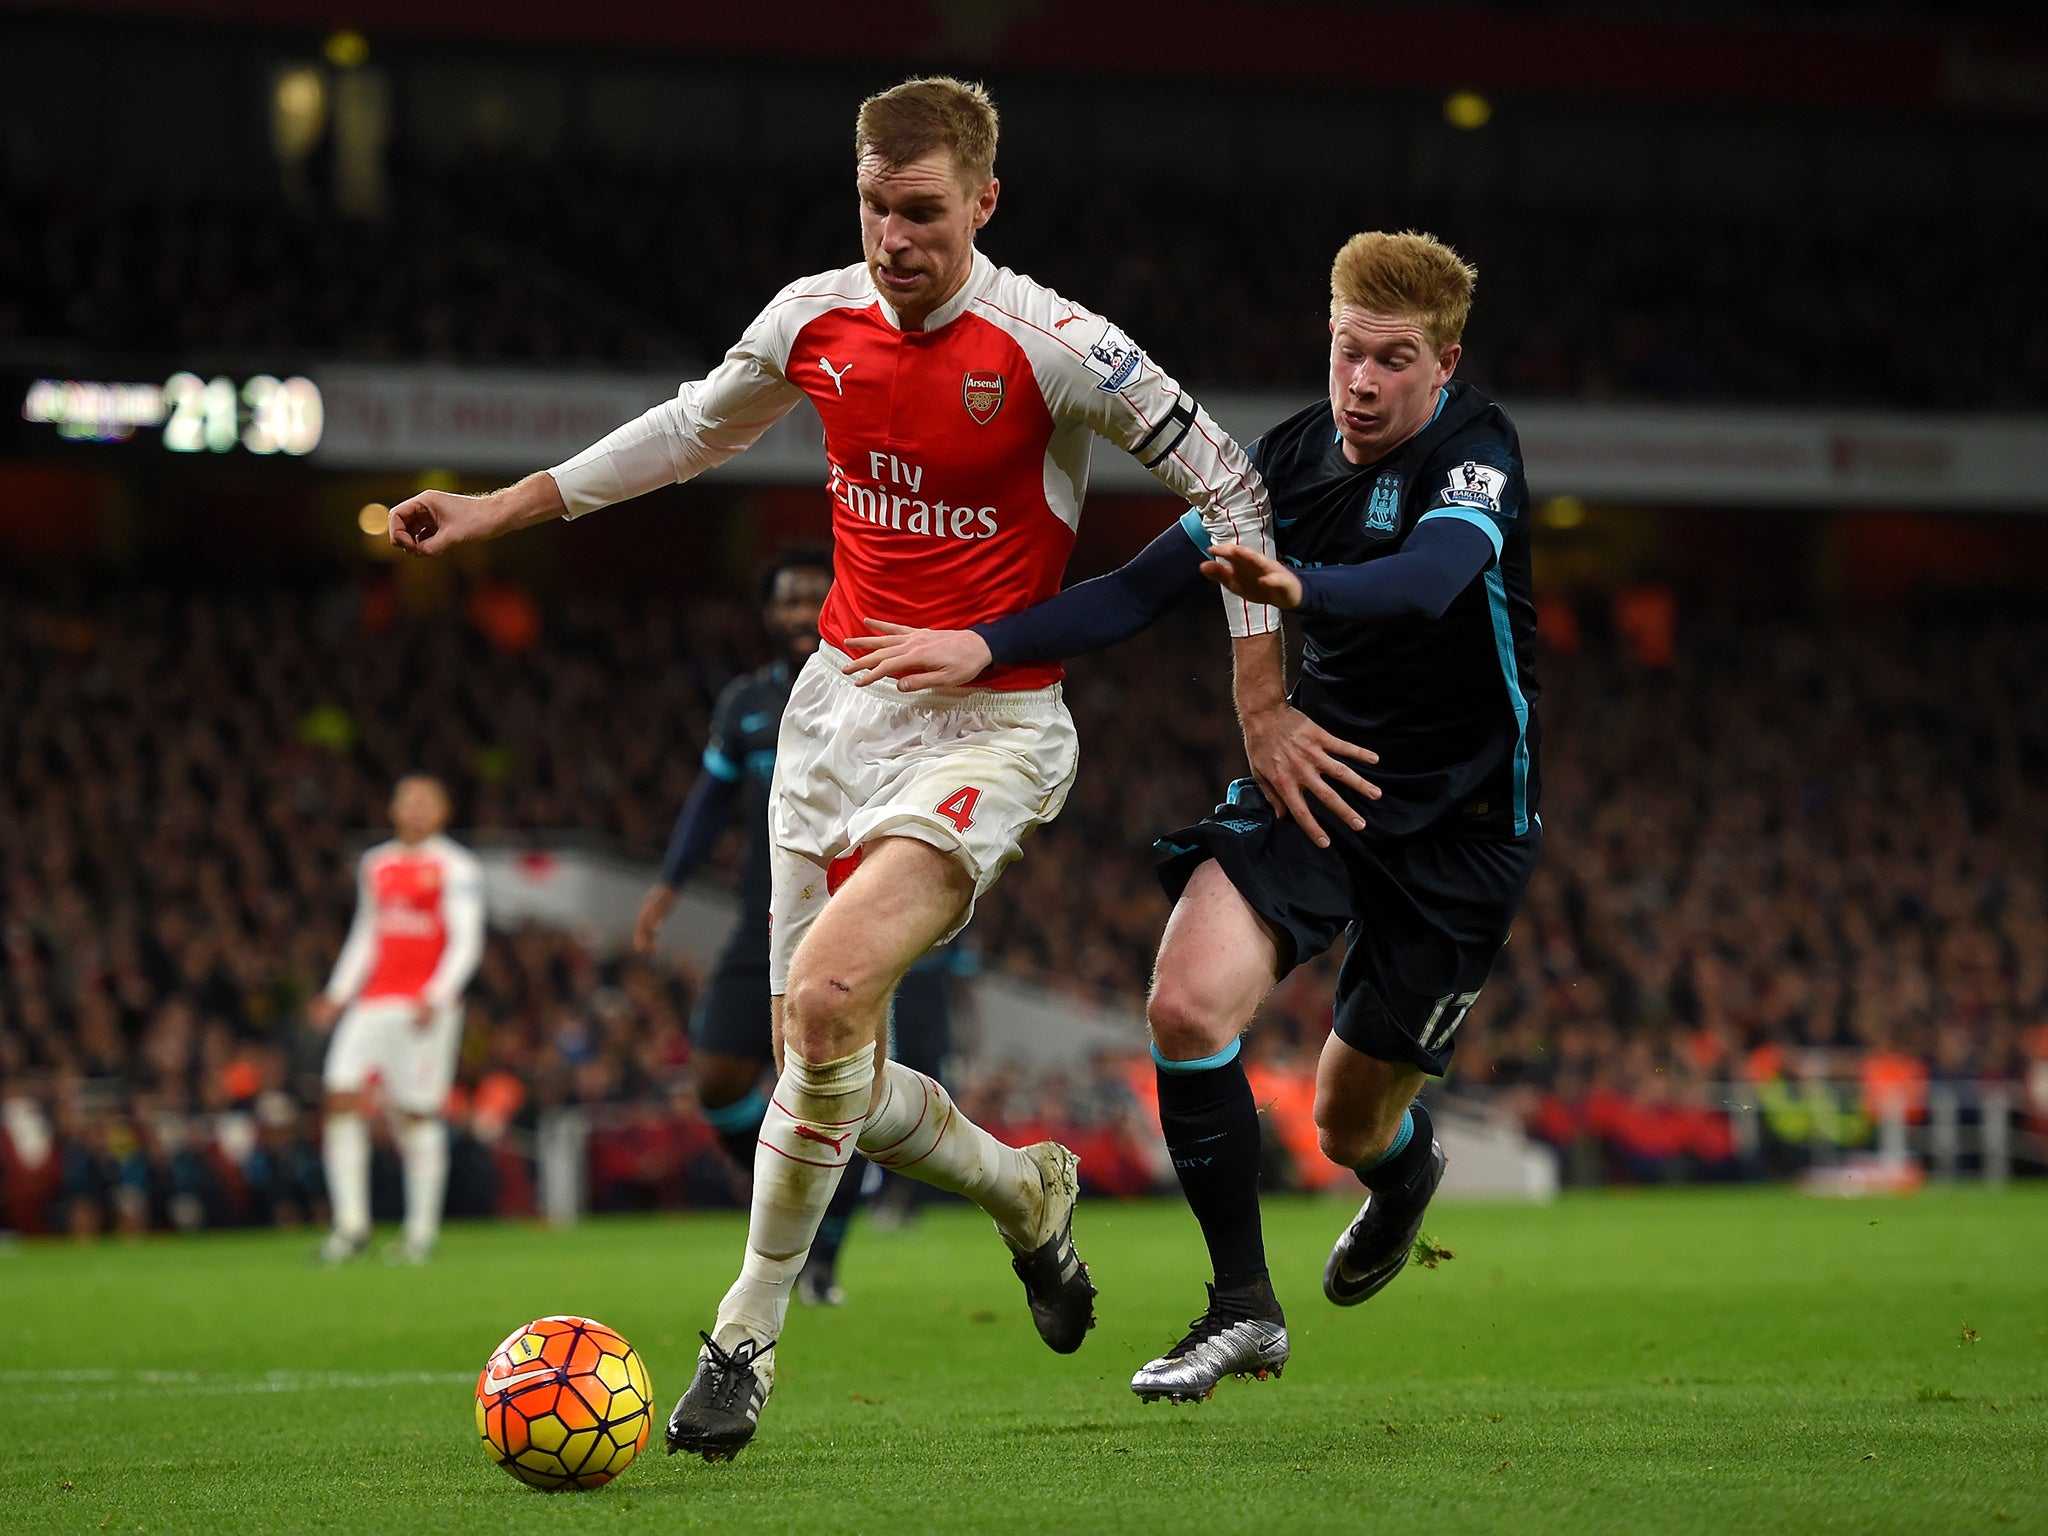 Per Mertesacker (left) had a cracking game at the Emirates on Monday night